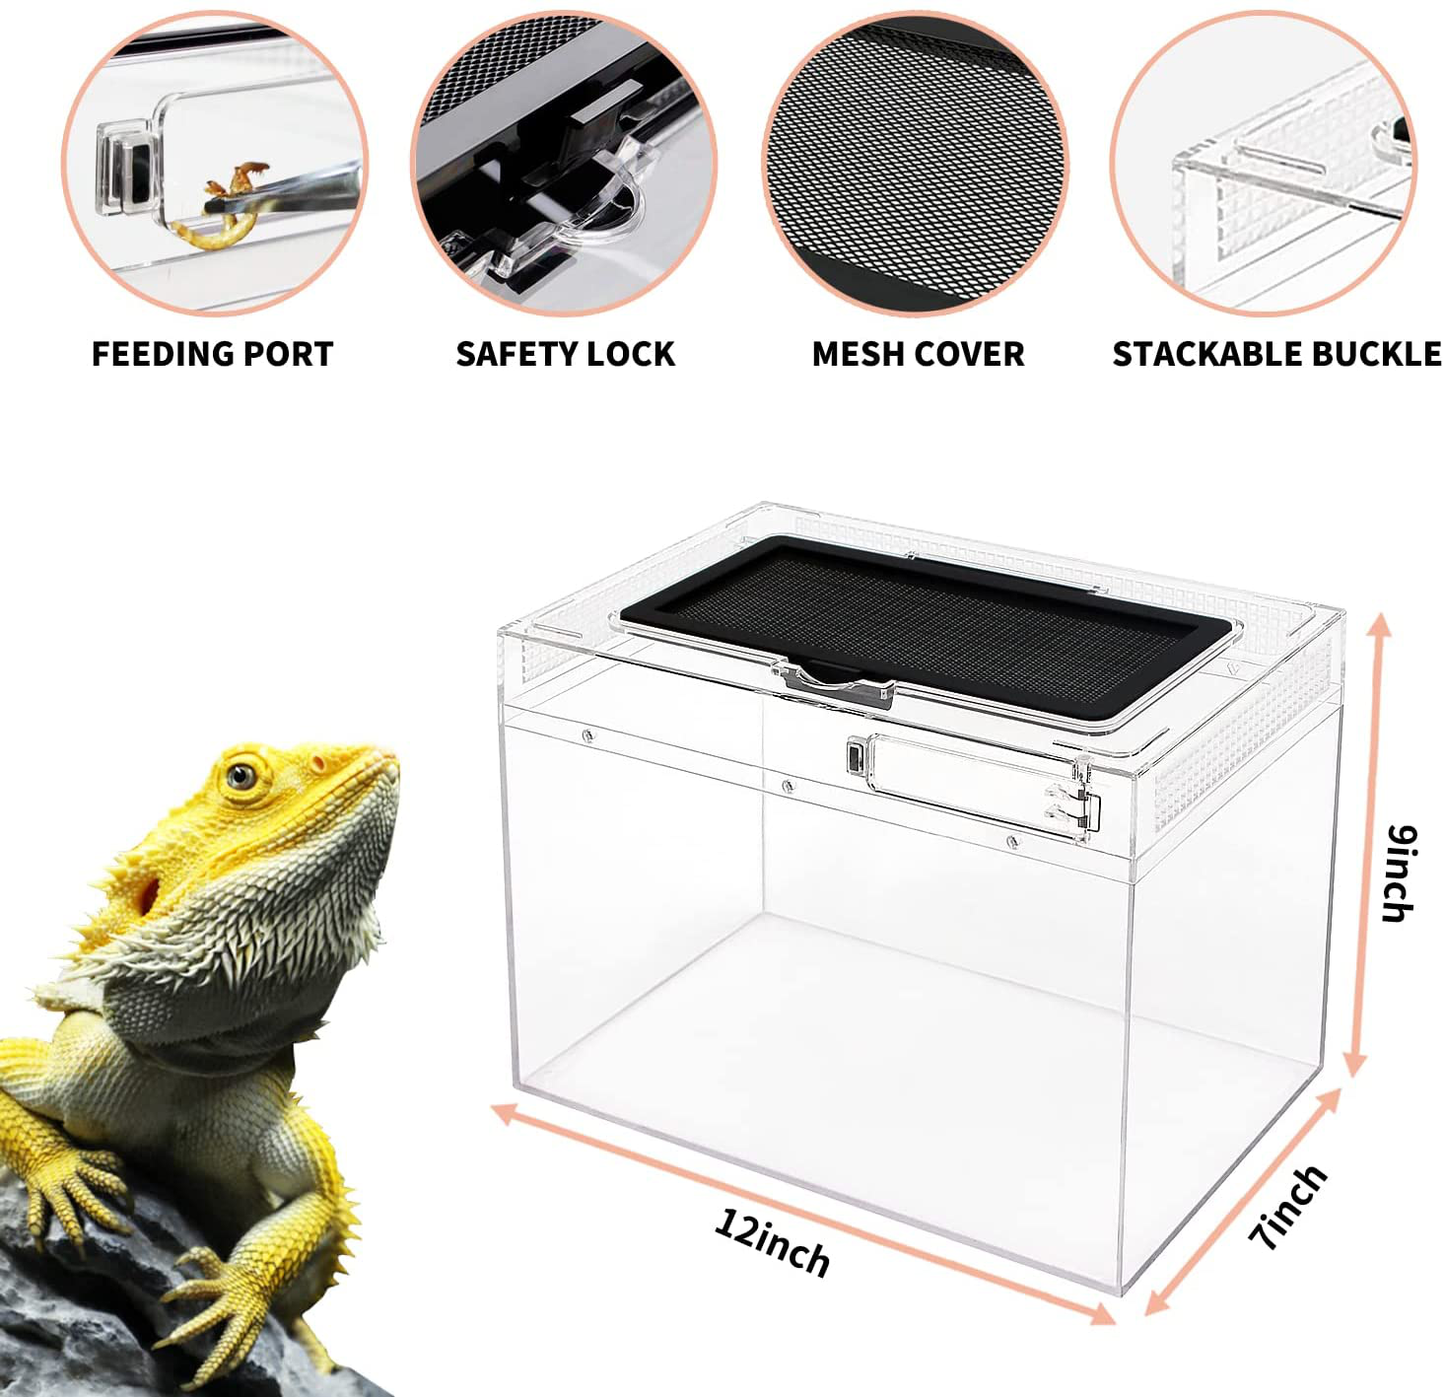 Reptile Growth Reptile Terrarium, 12" X 7"X 9" Reptile Tank with Full View Visually Appealing,Crystal Explosion Proof PC Mini Reptile Habitat Cages for Reptiles and Amphibians. Animals & Pet Supplies > Pet Supplies > Reptile & Amphibian Supplies > Reptile & Amphibian Habitat Accessories Reptile Growth   